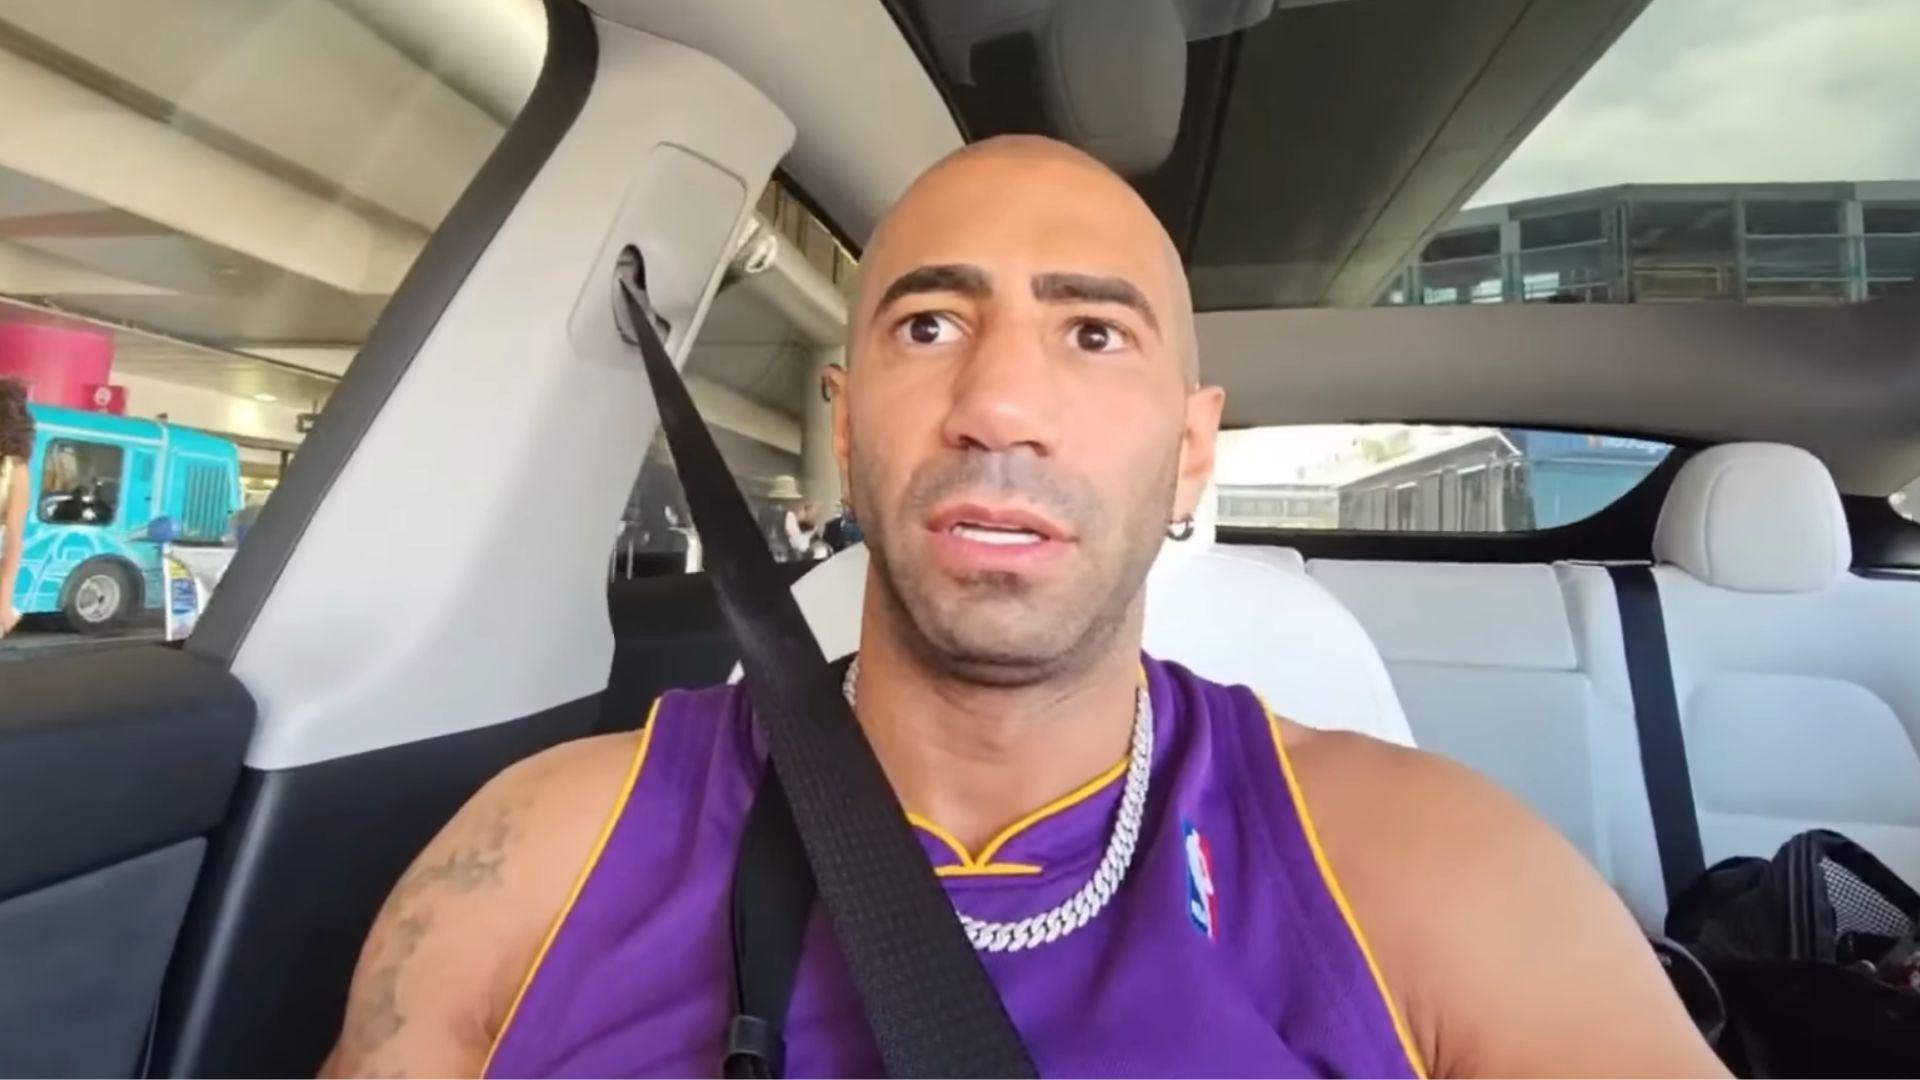 Fousey in purple and yellow laker shirt sat in car talking to camera.